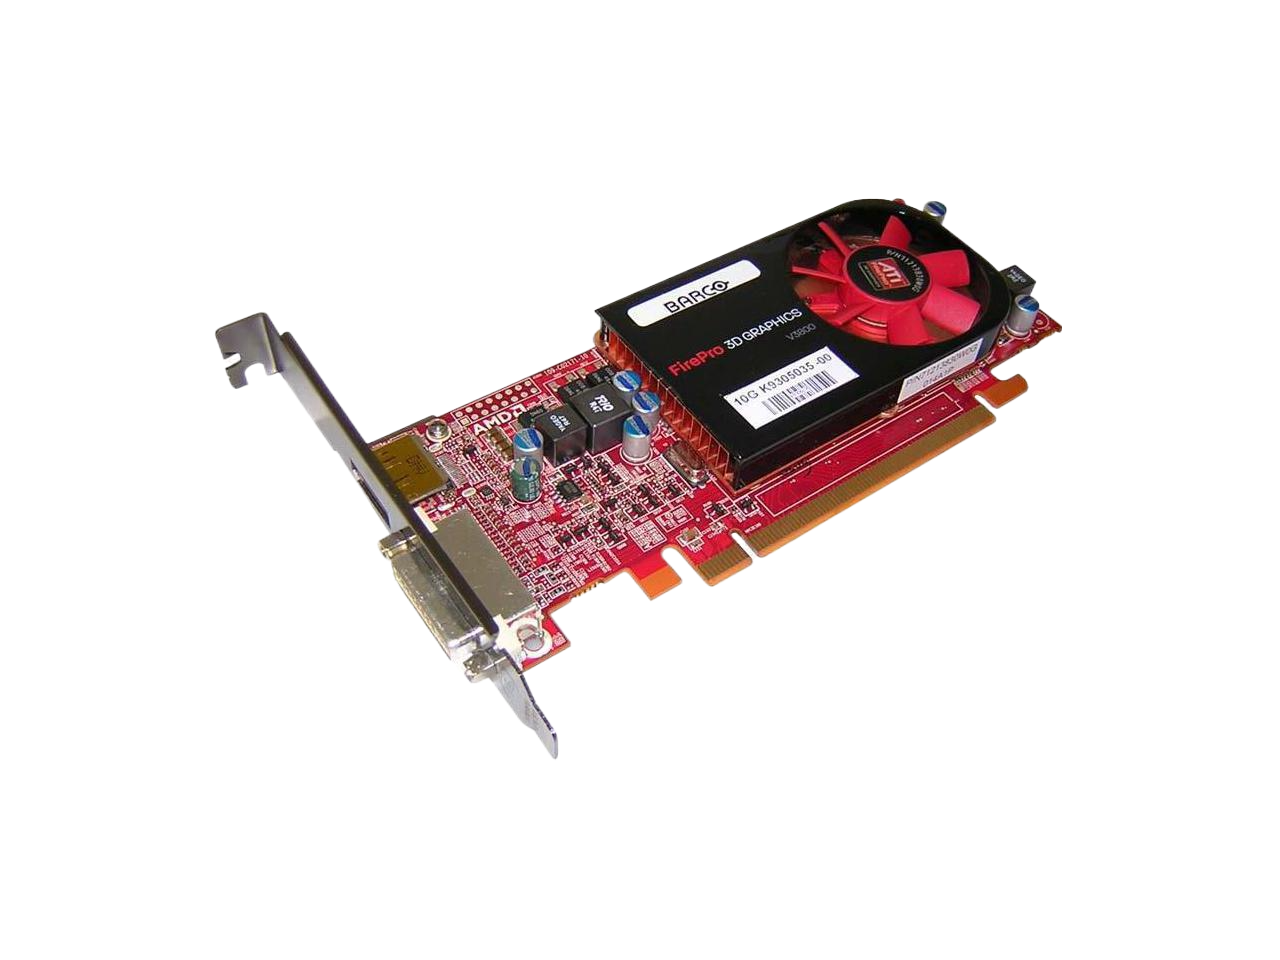 AMD MXRT-2400 FirePro 512 MB DDR3 SDRAM PCI Express 2.0 x16 Low-profile Single Slot Space Required Workstation Graphics Card